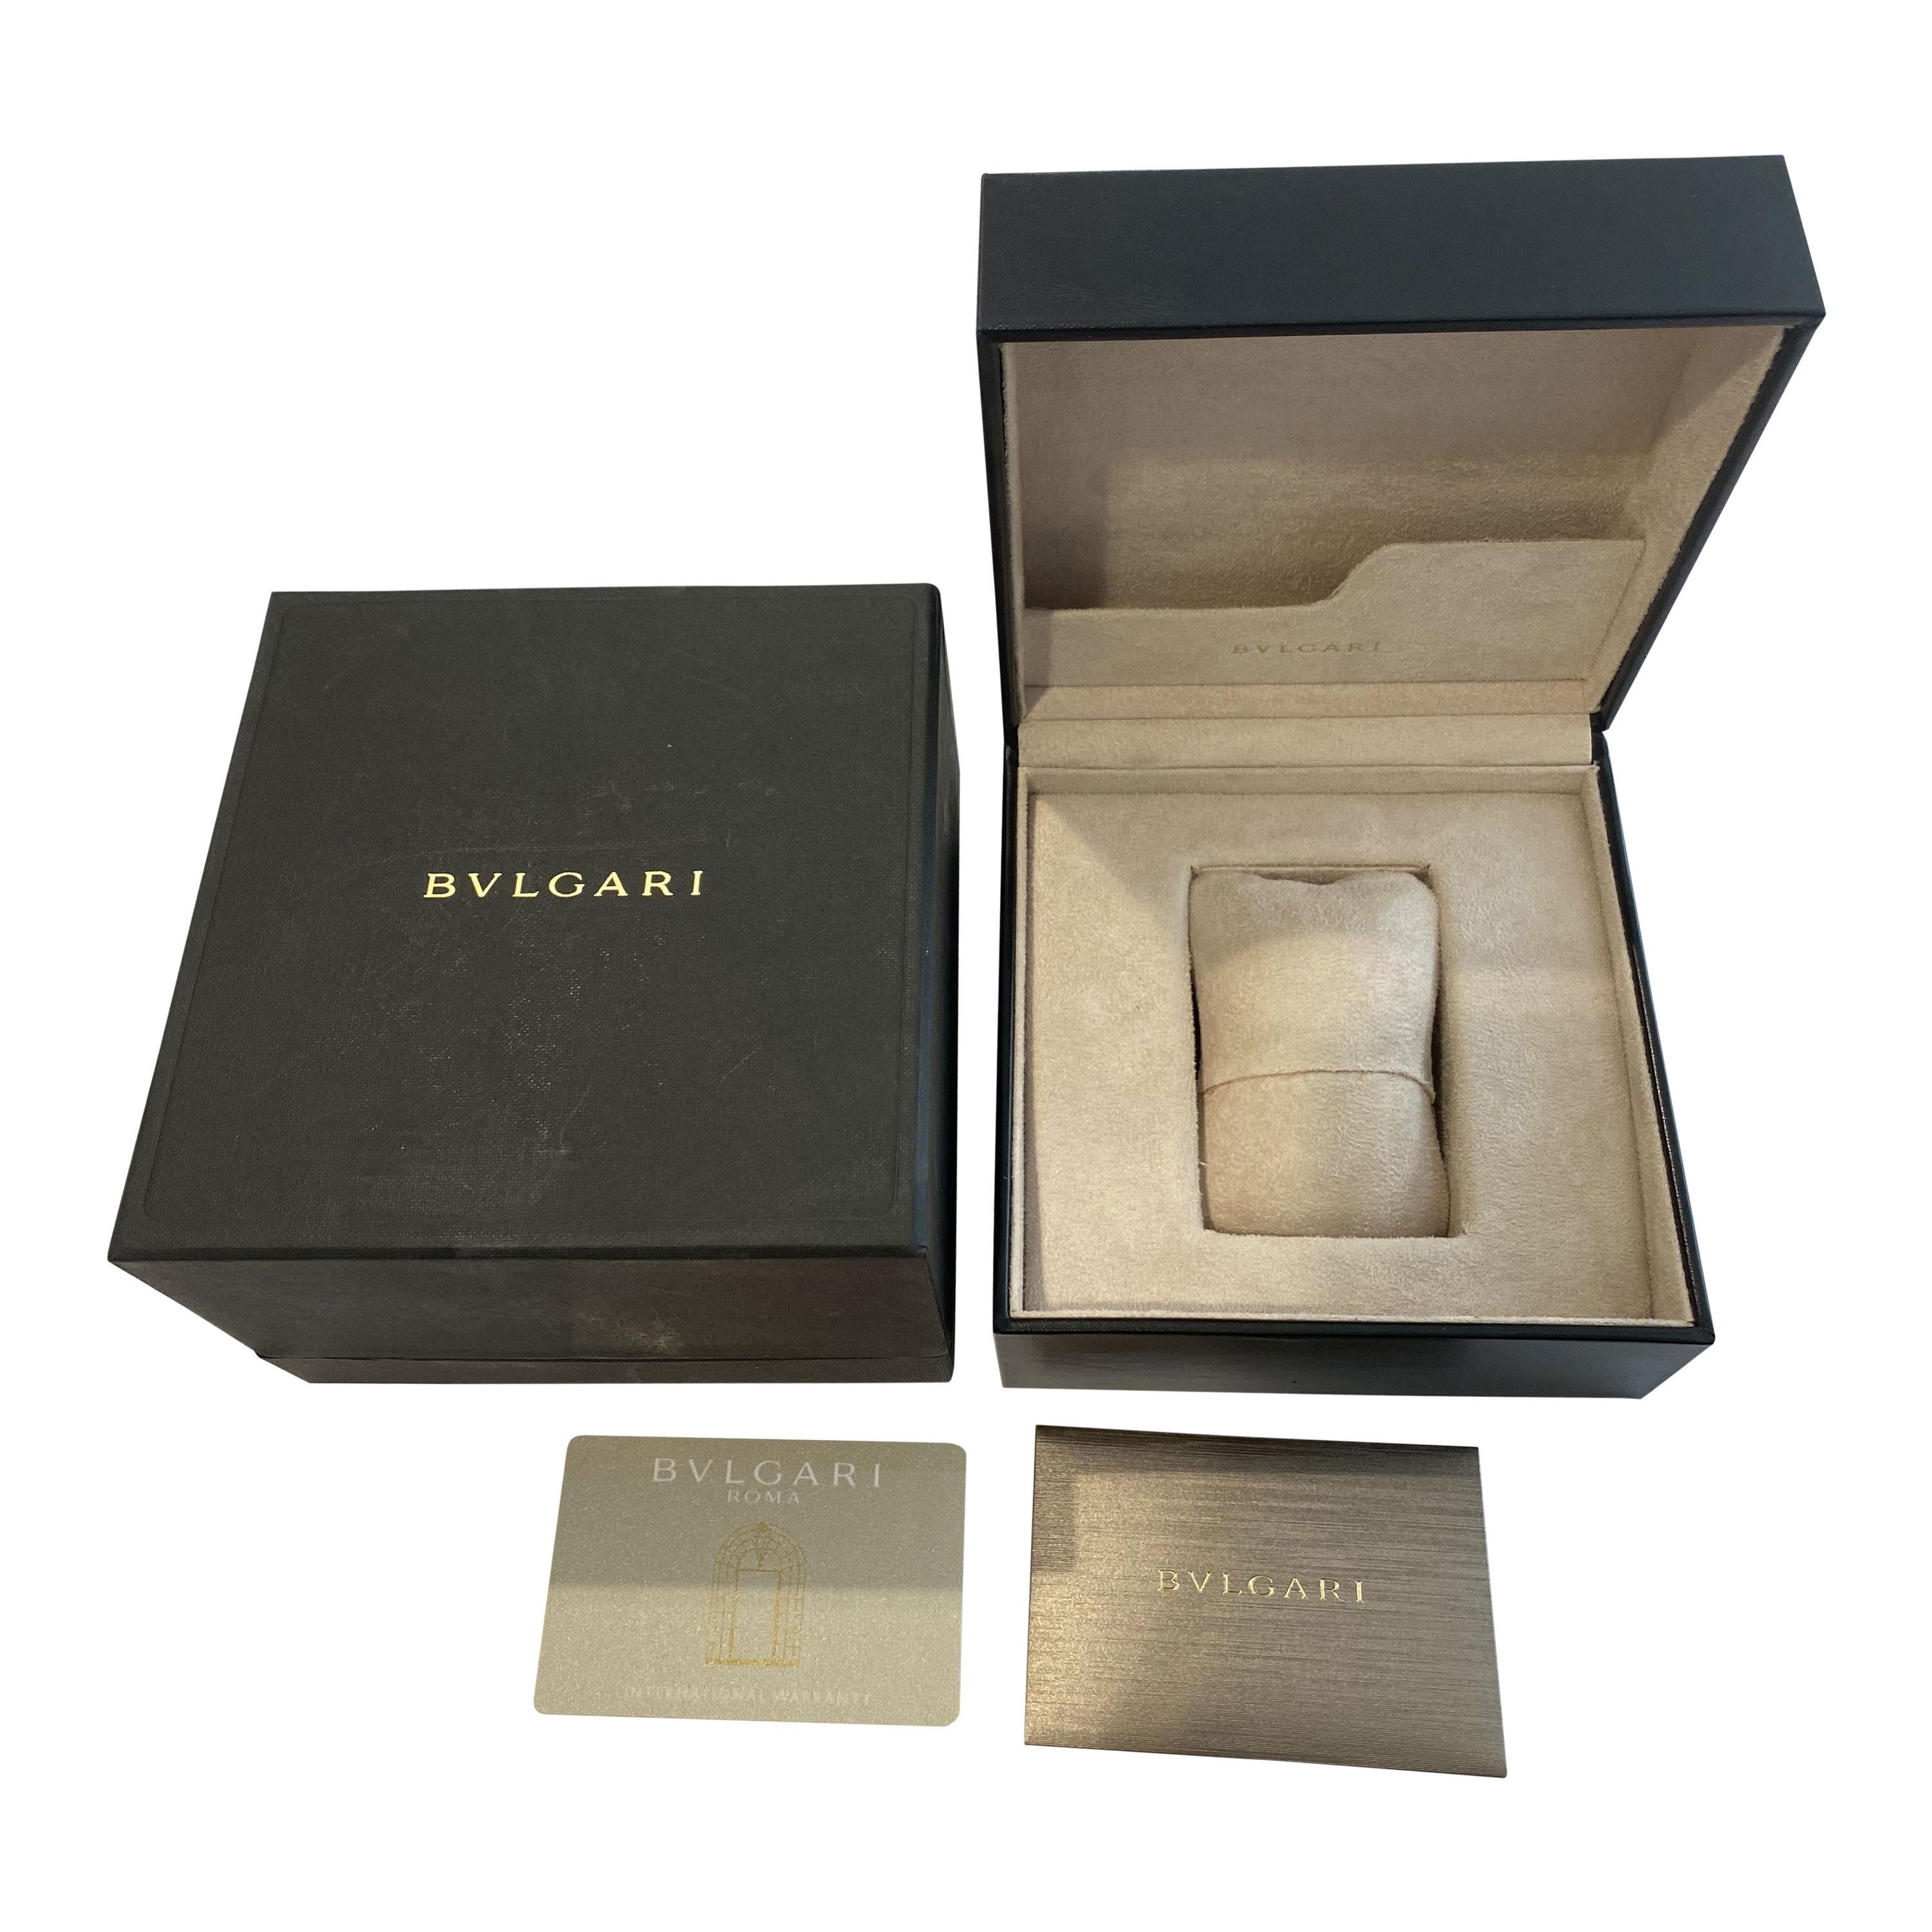 Bulgari Lucea 102192 LUP 33 SG Women's Watch in 18kt Stainless Steel/Rose Gold 2